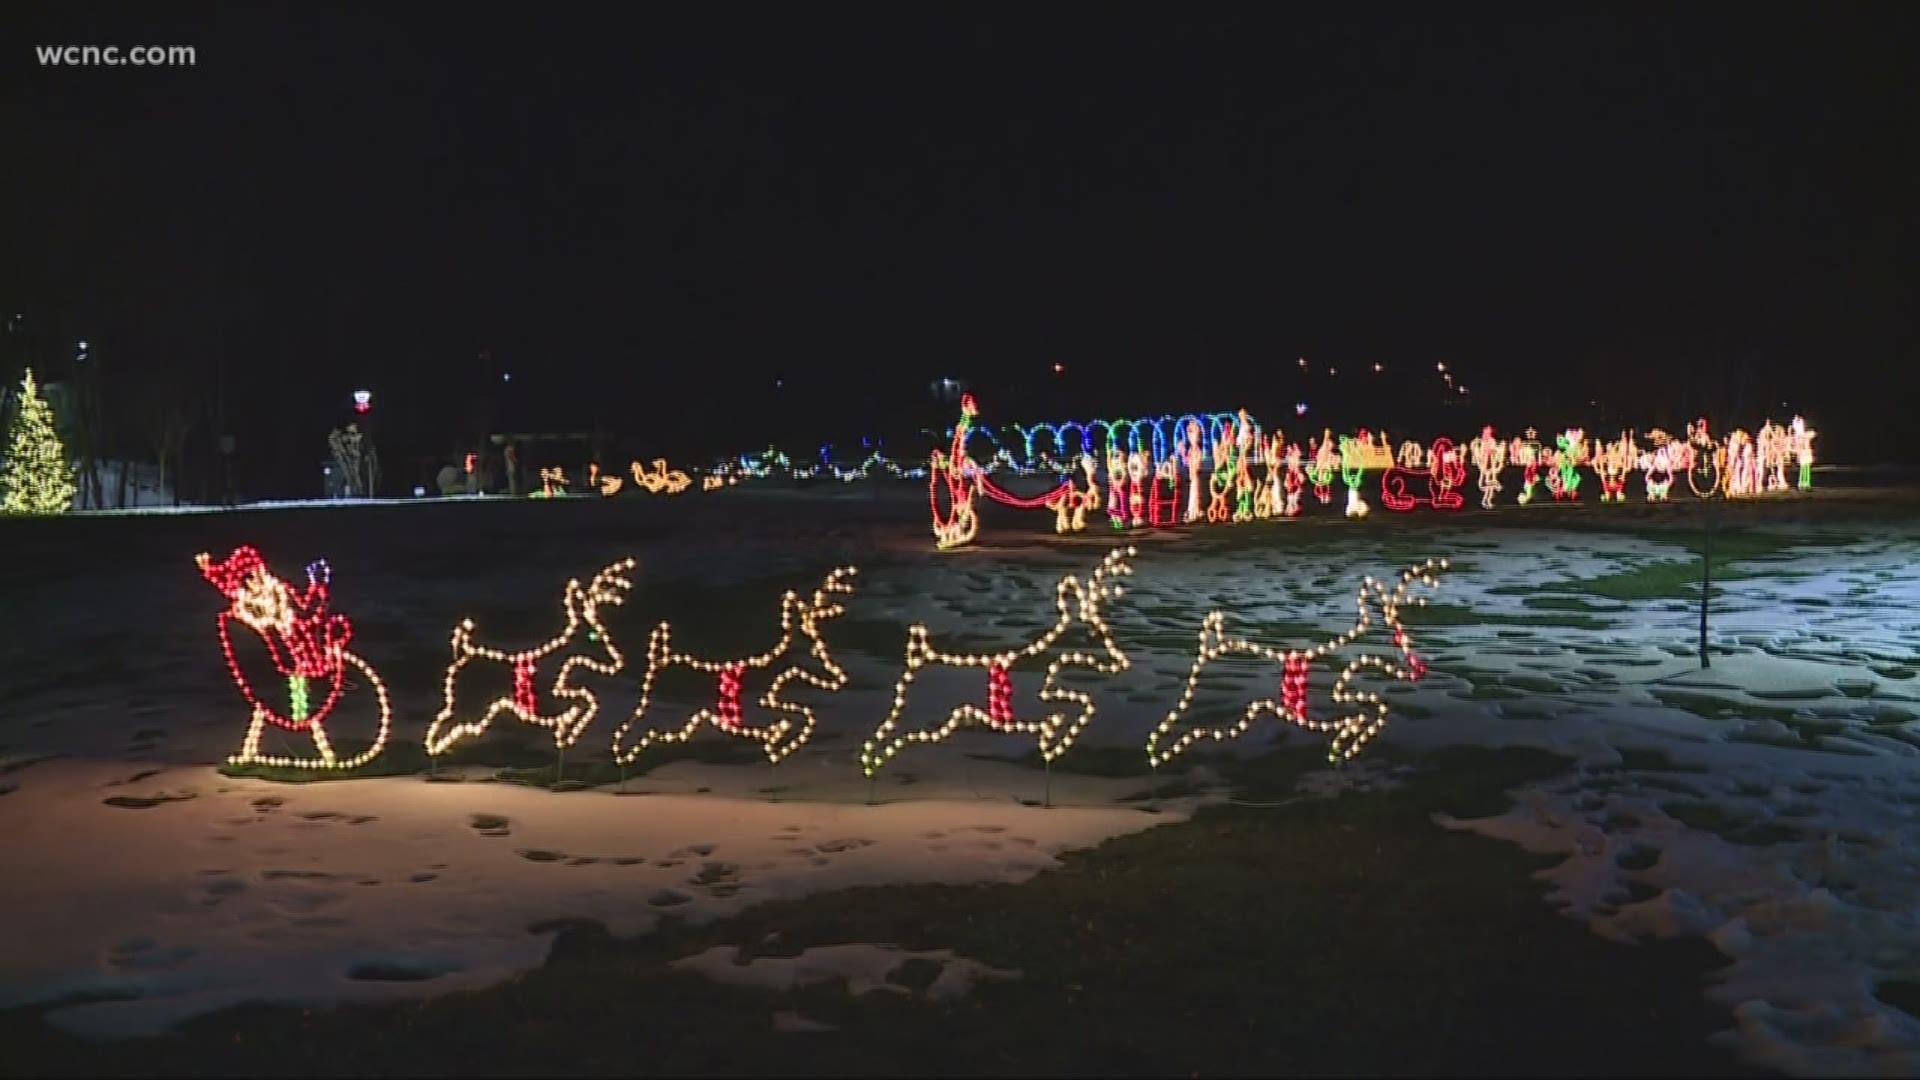 The original creator of a local light show passed, but the town kept the tradition alive by purchasing the display.